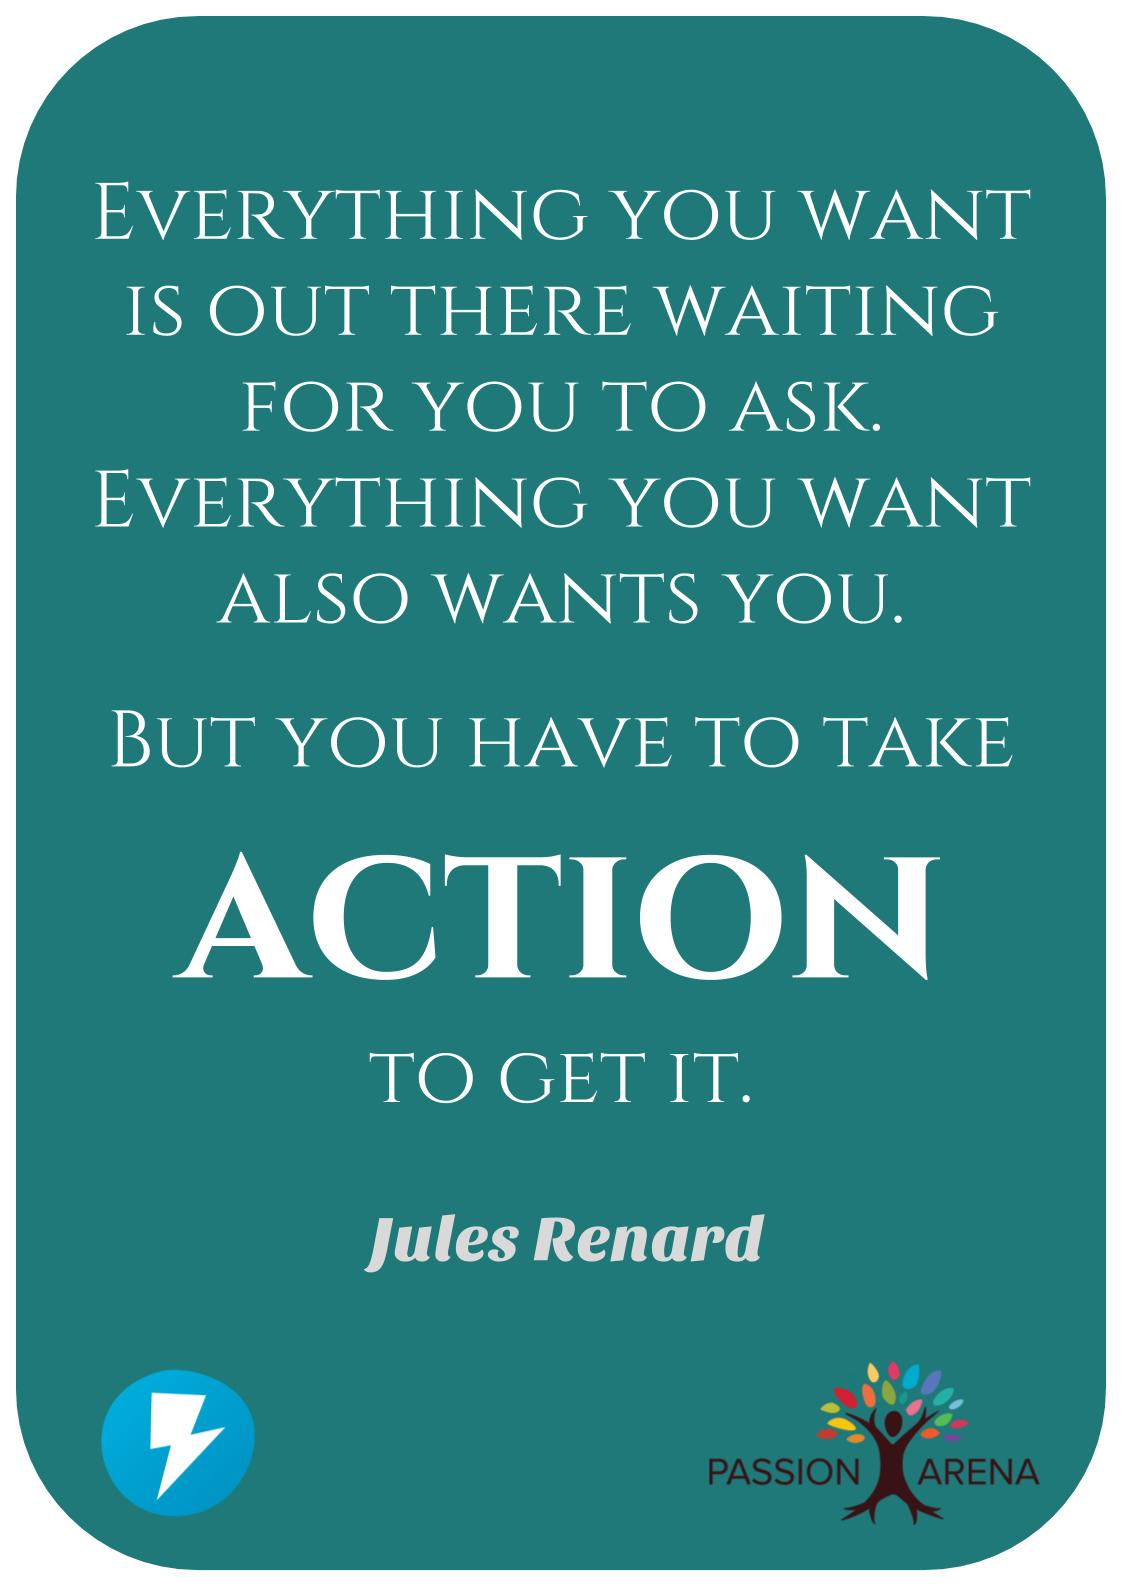 Intro-1-9. How good are you at taking action?